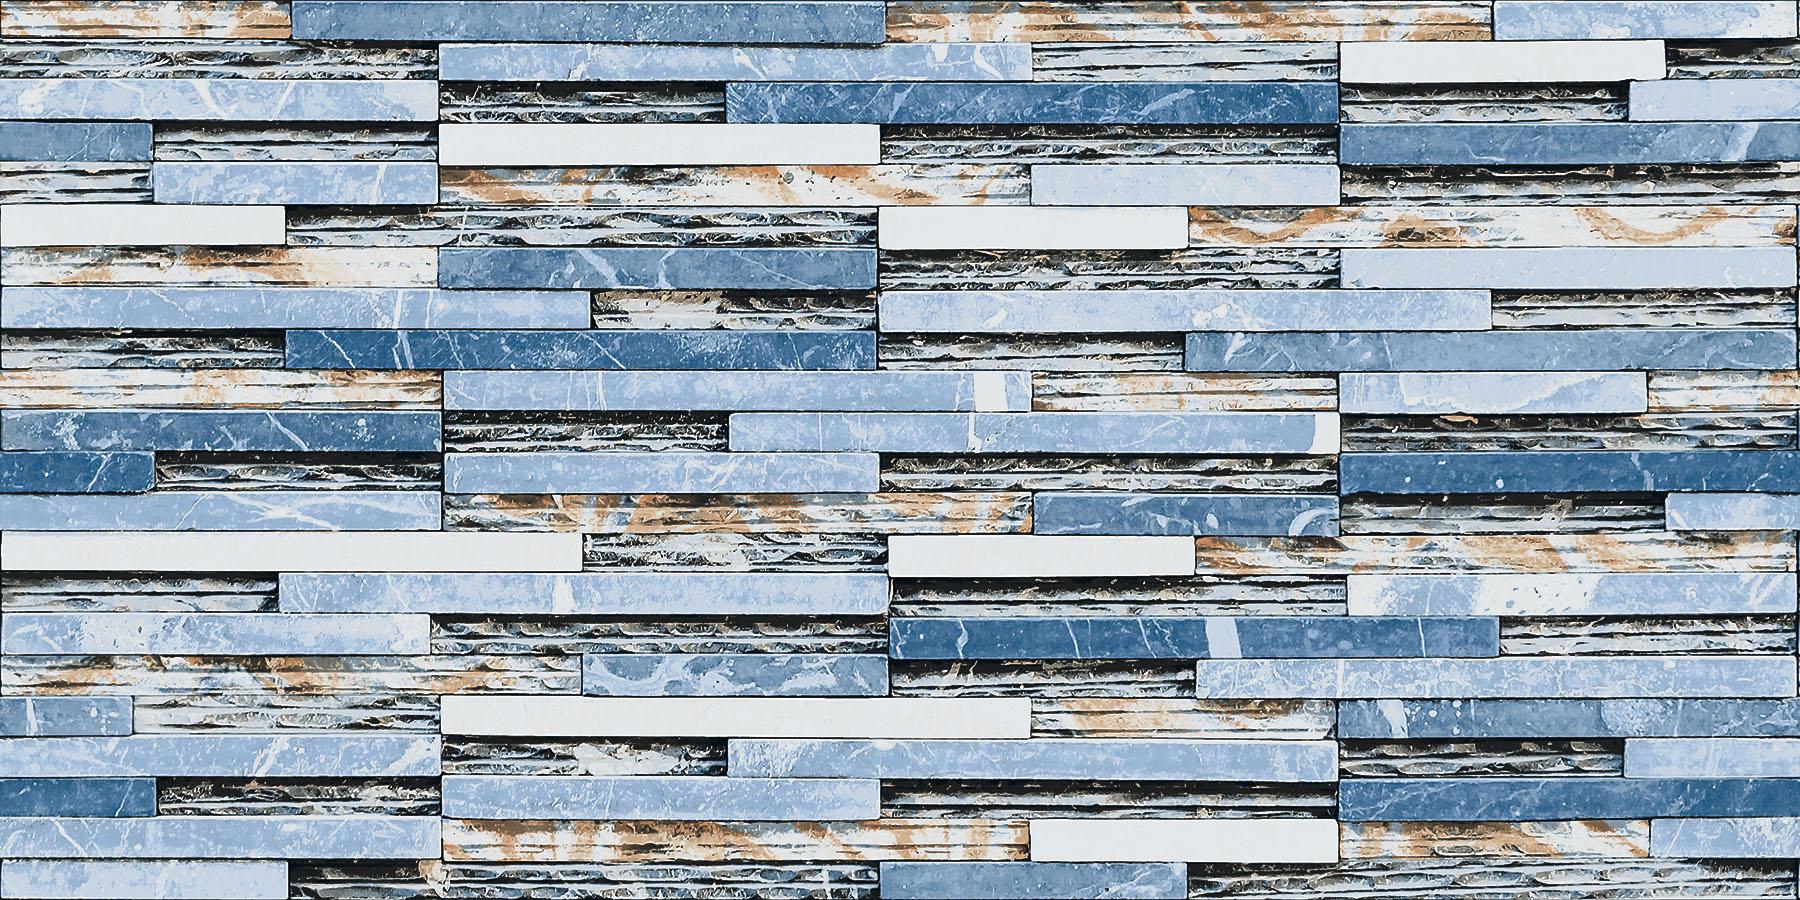 Blue Tiles for Bathroom Tiles, Living Room Tiles, Elevation Tiles, Accent Tiles, Hospital Tiles, Commercial/Office, Outdoor Area, School & Collages